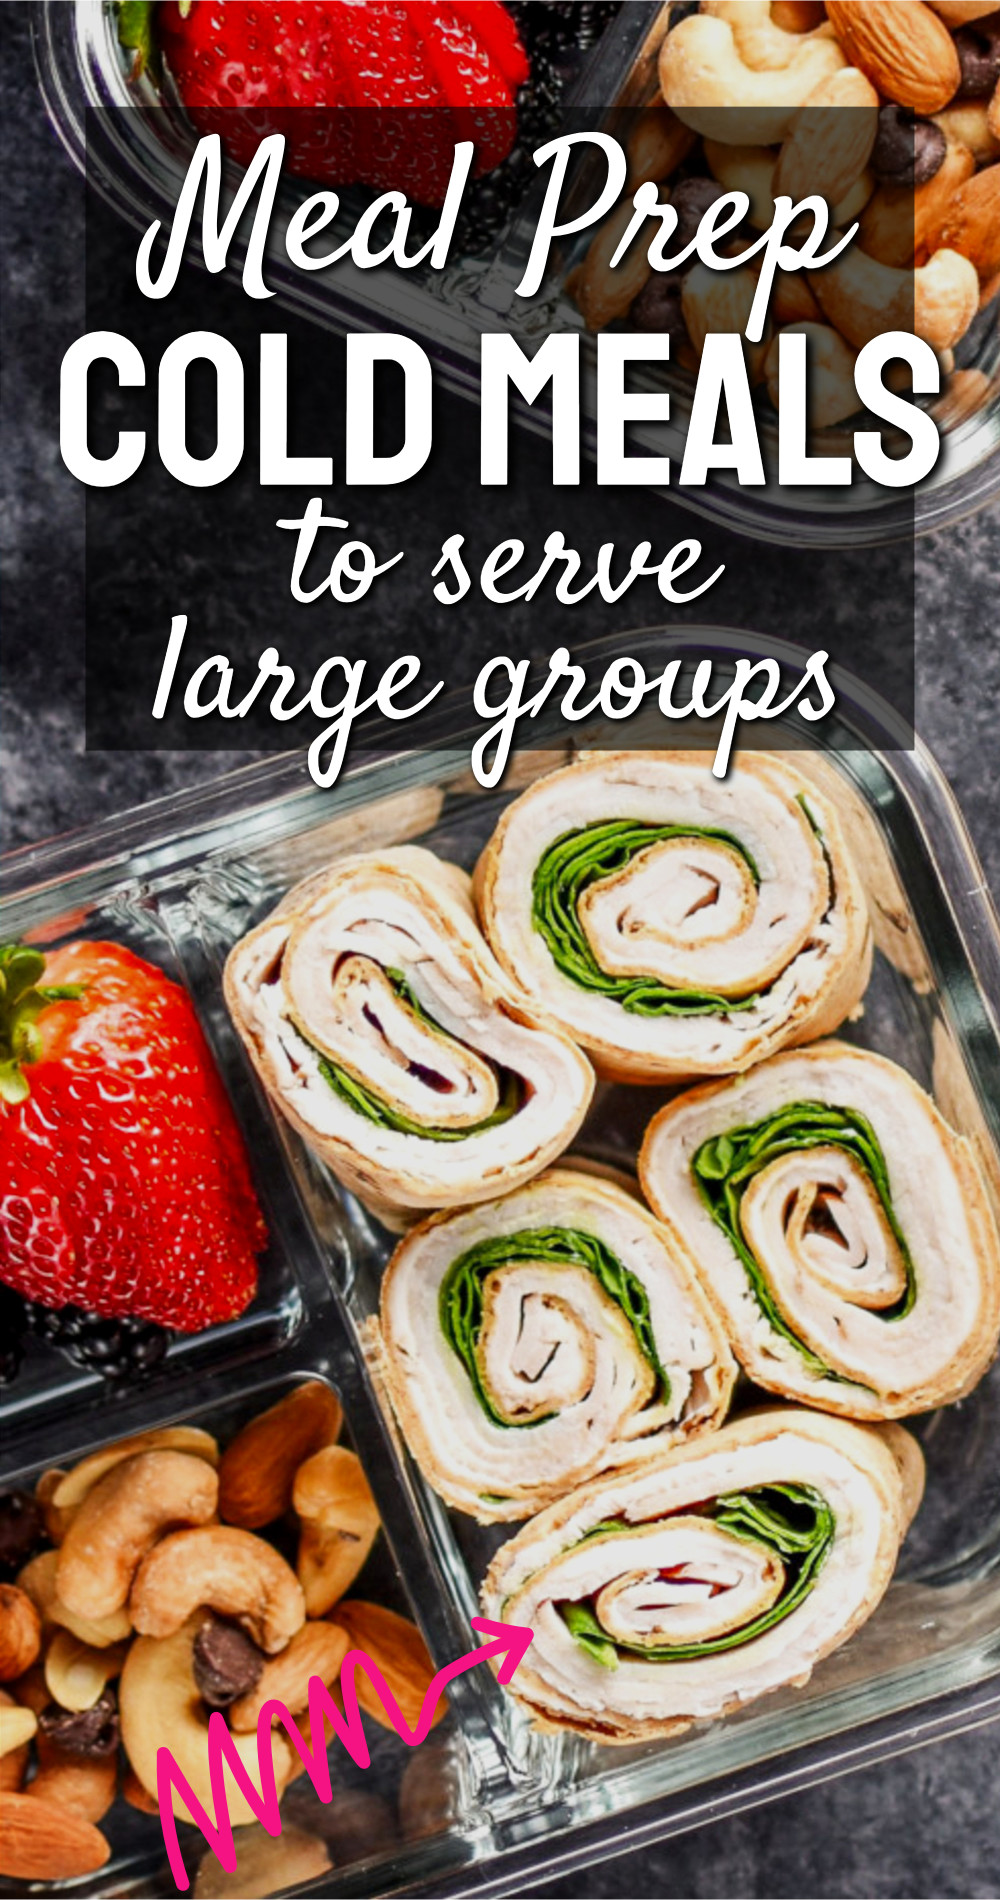 Meal Prep Cold Meals To Serve Large Groups, turkey pinwheel rolls ups, fresh strawberries and mixed nuts for a premade cold lunch for a crowd